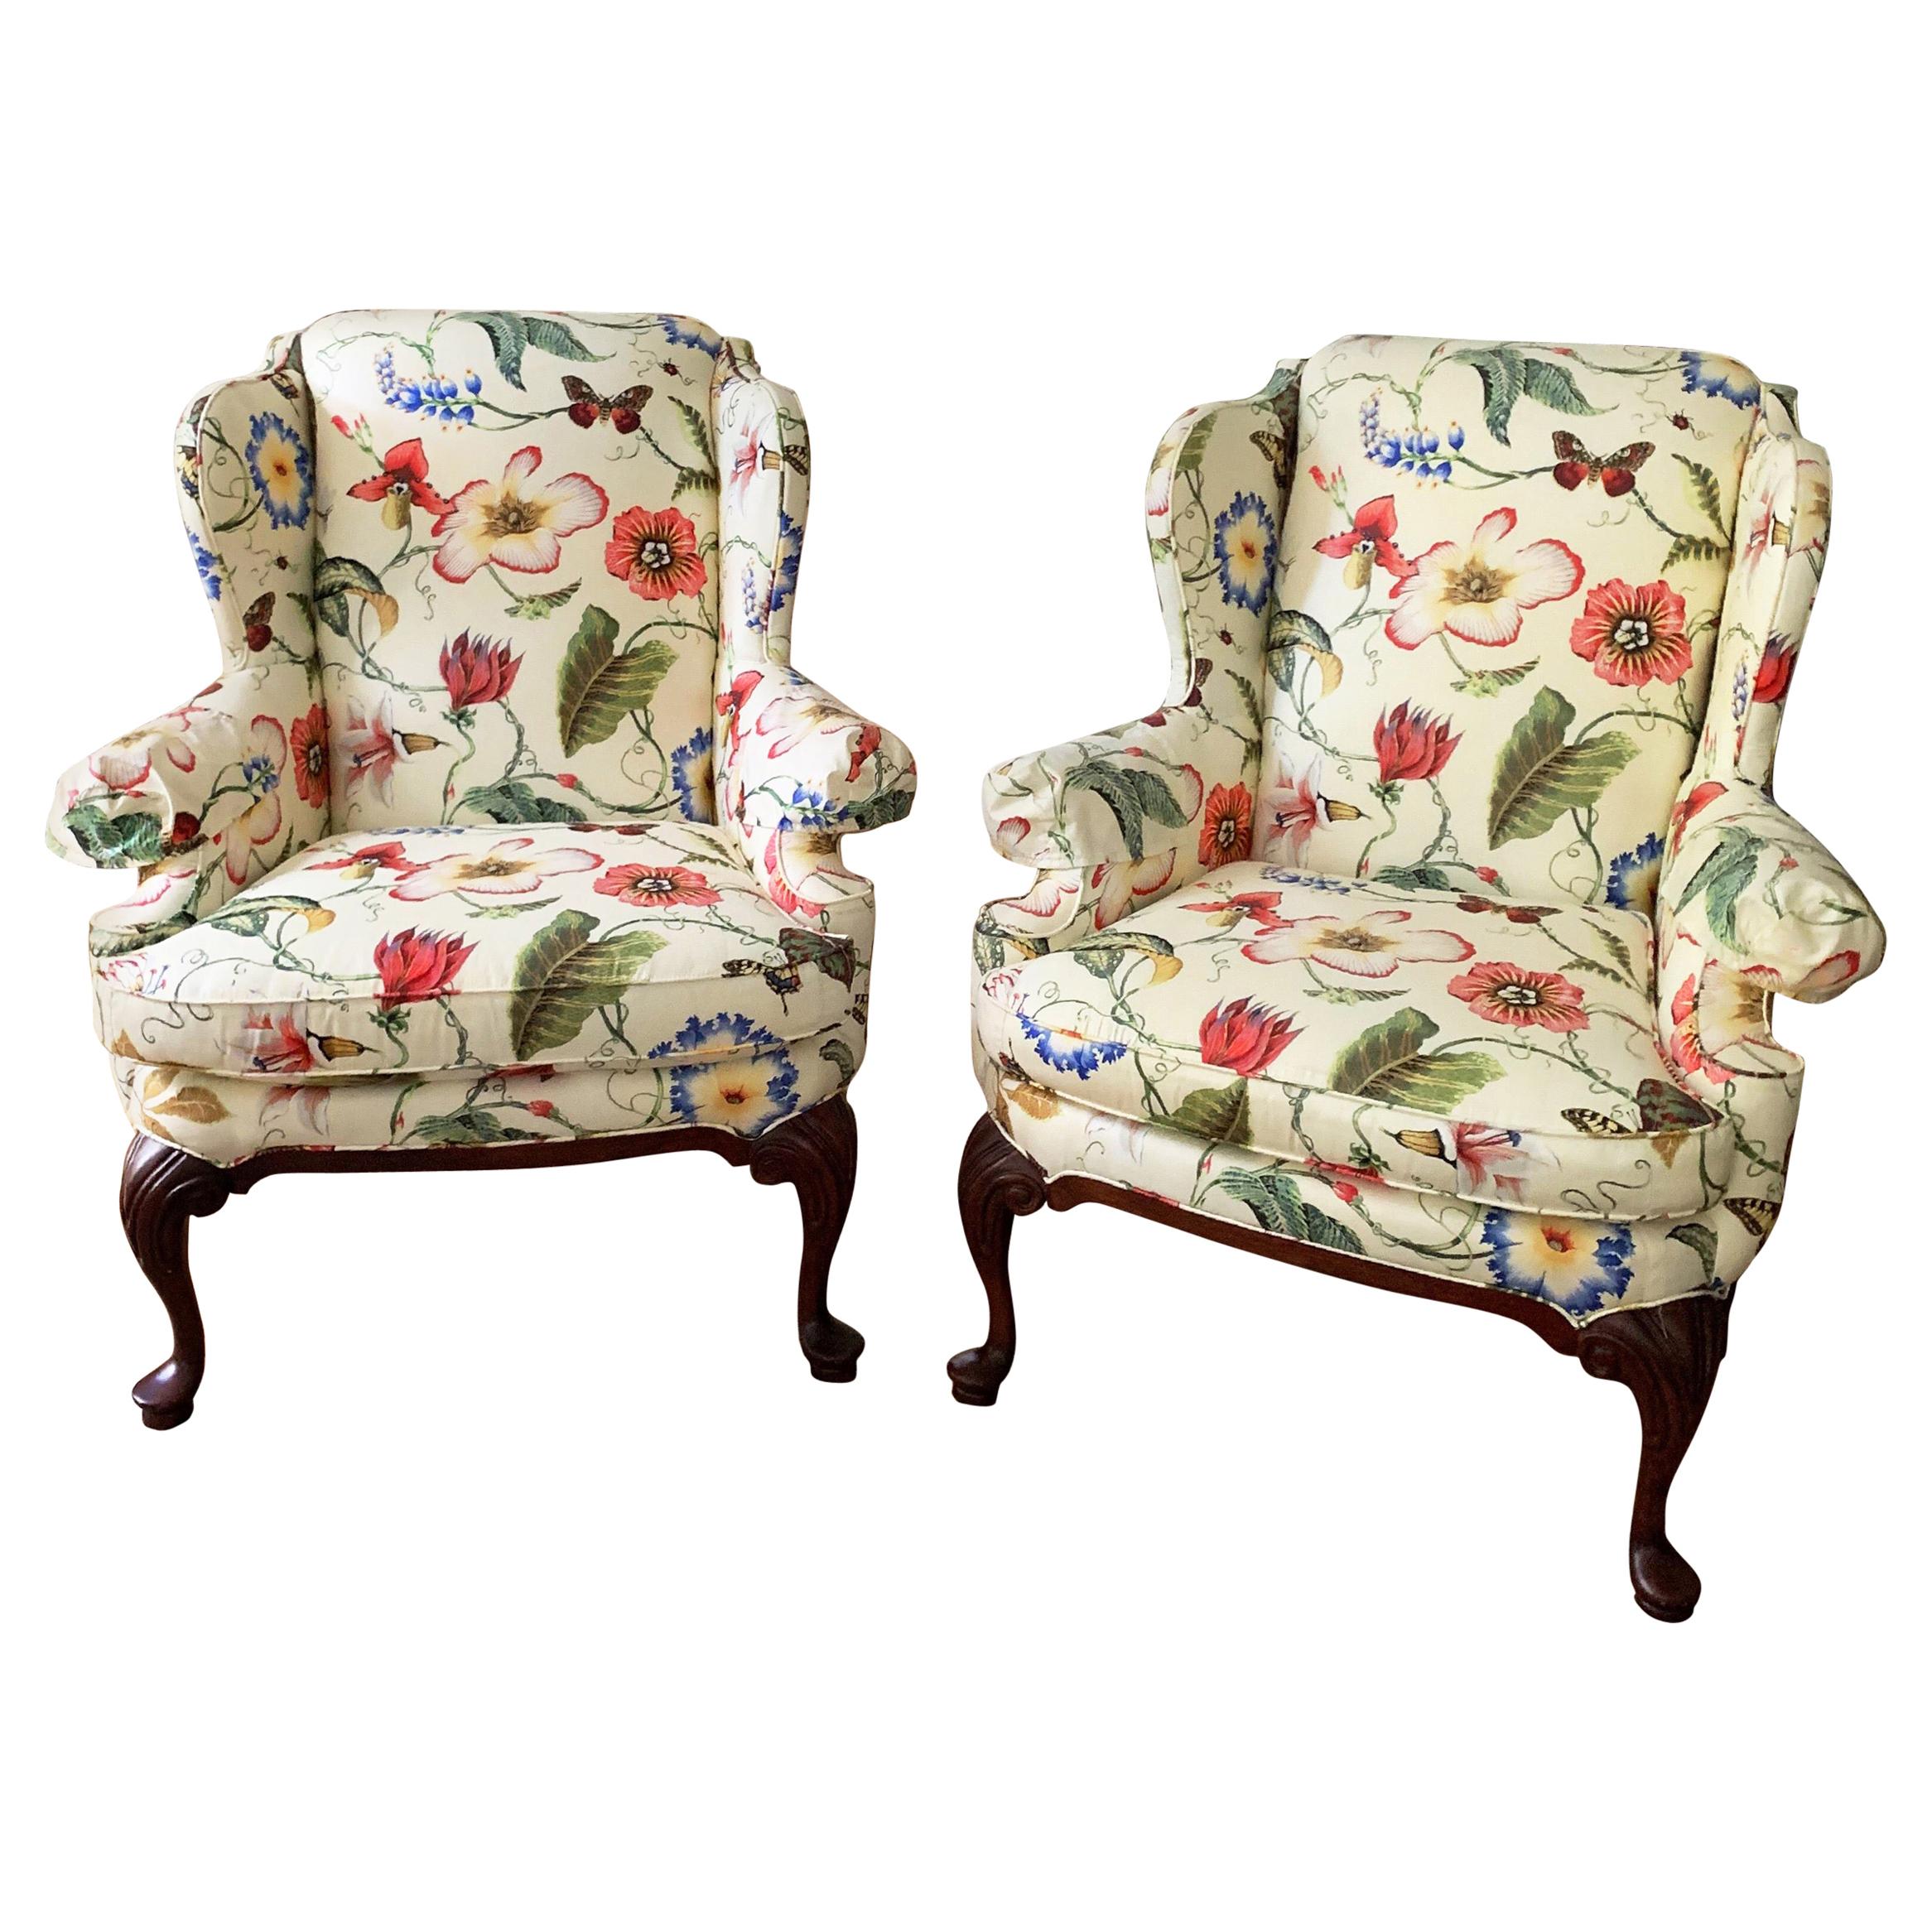 Gorgeous custom Highland House custom floral contemporary wingback armchair. Two available. Listing is for one chair.  
